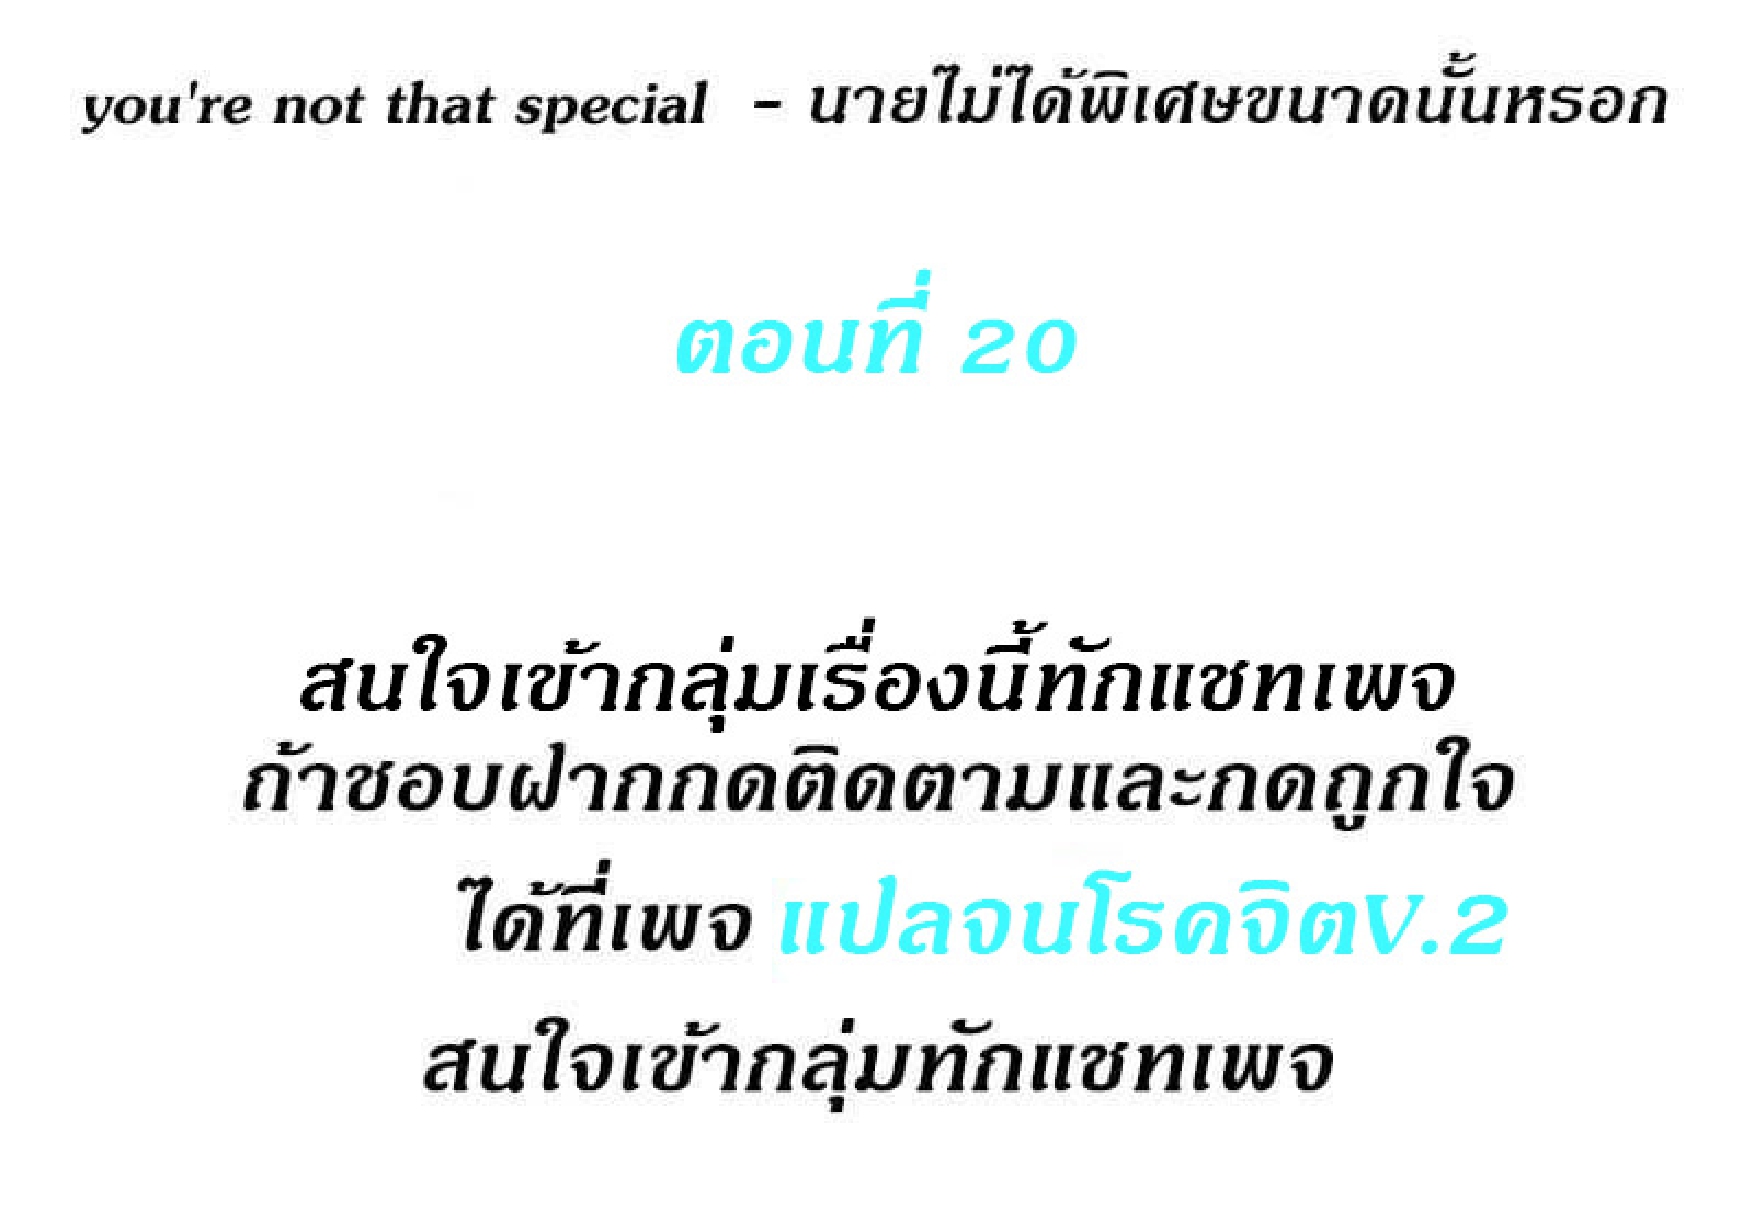 Youโ€re Not That Special! 20 01